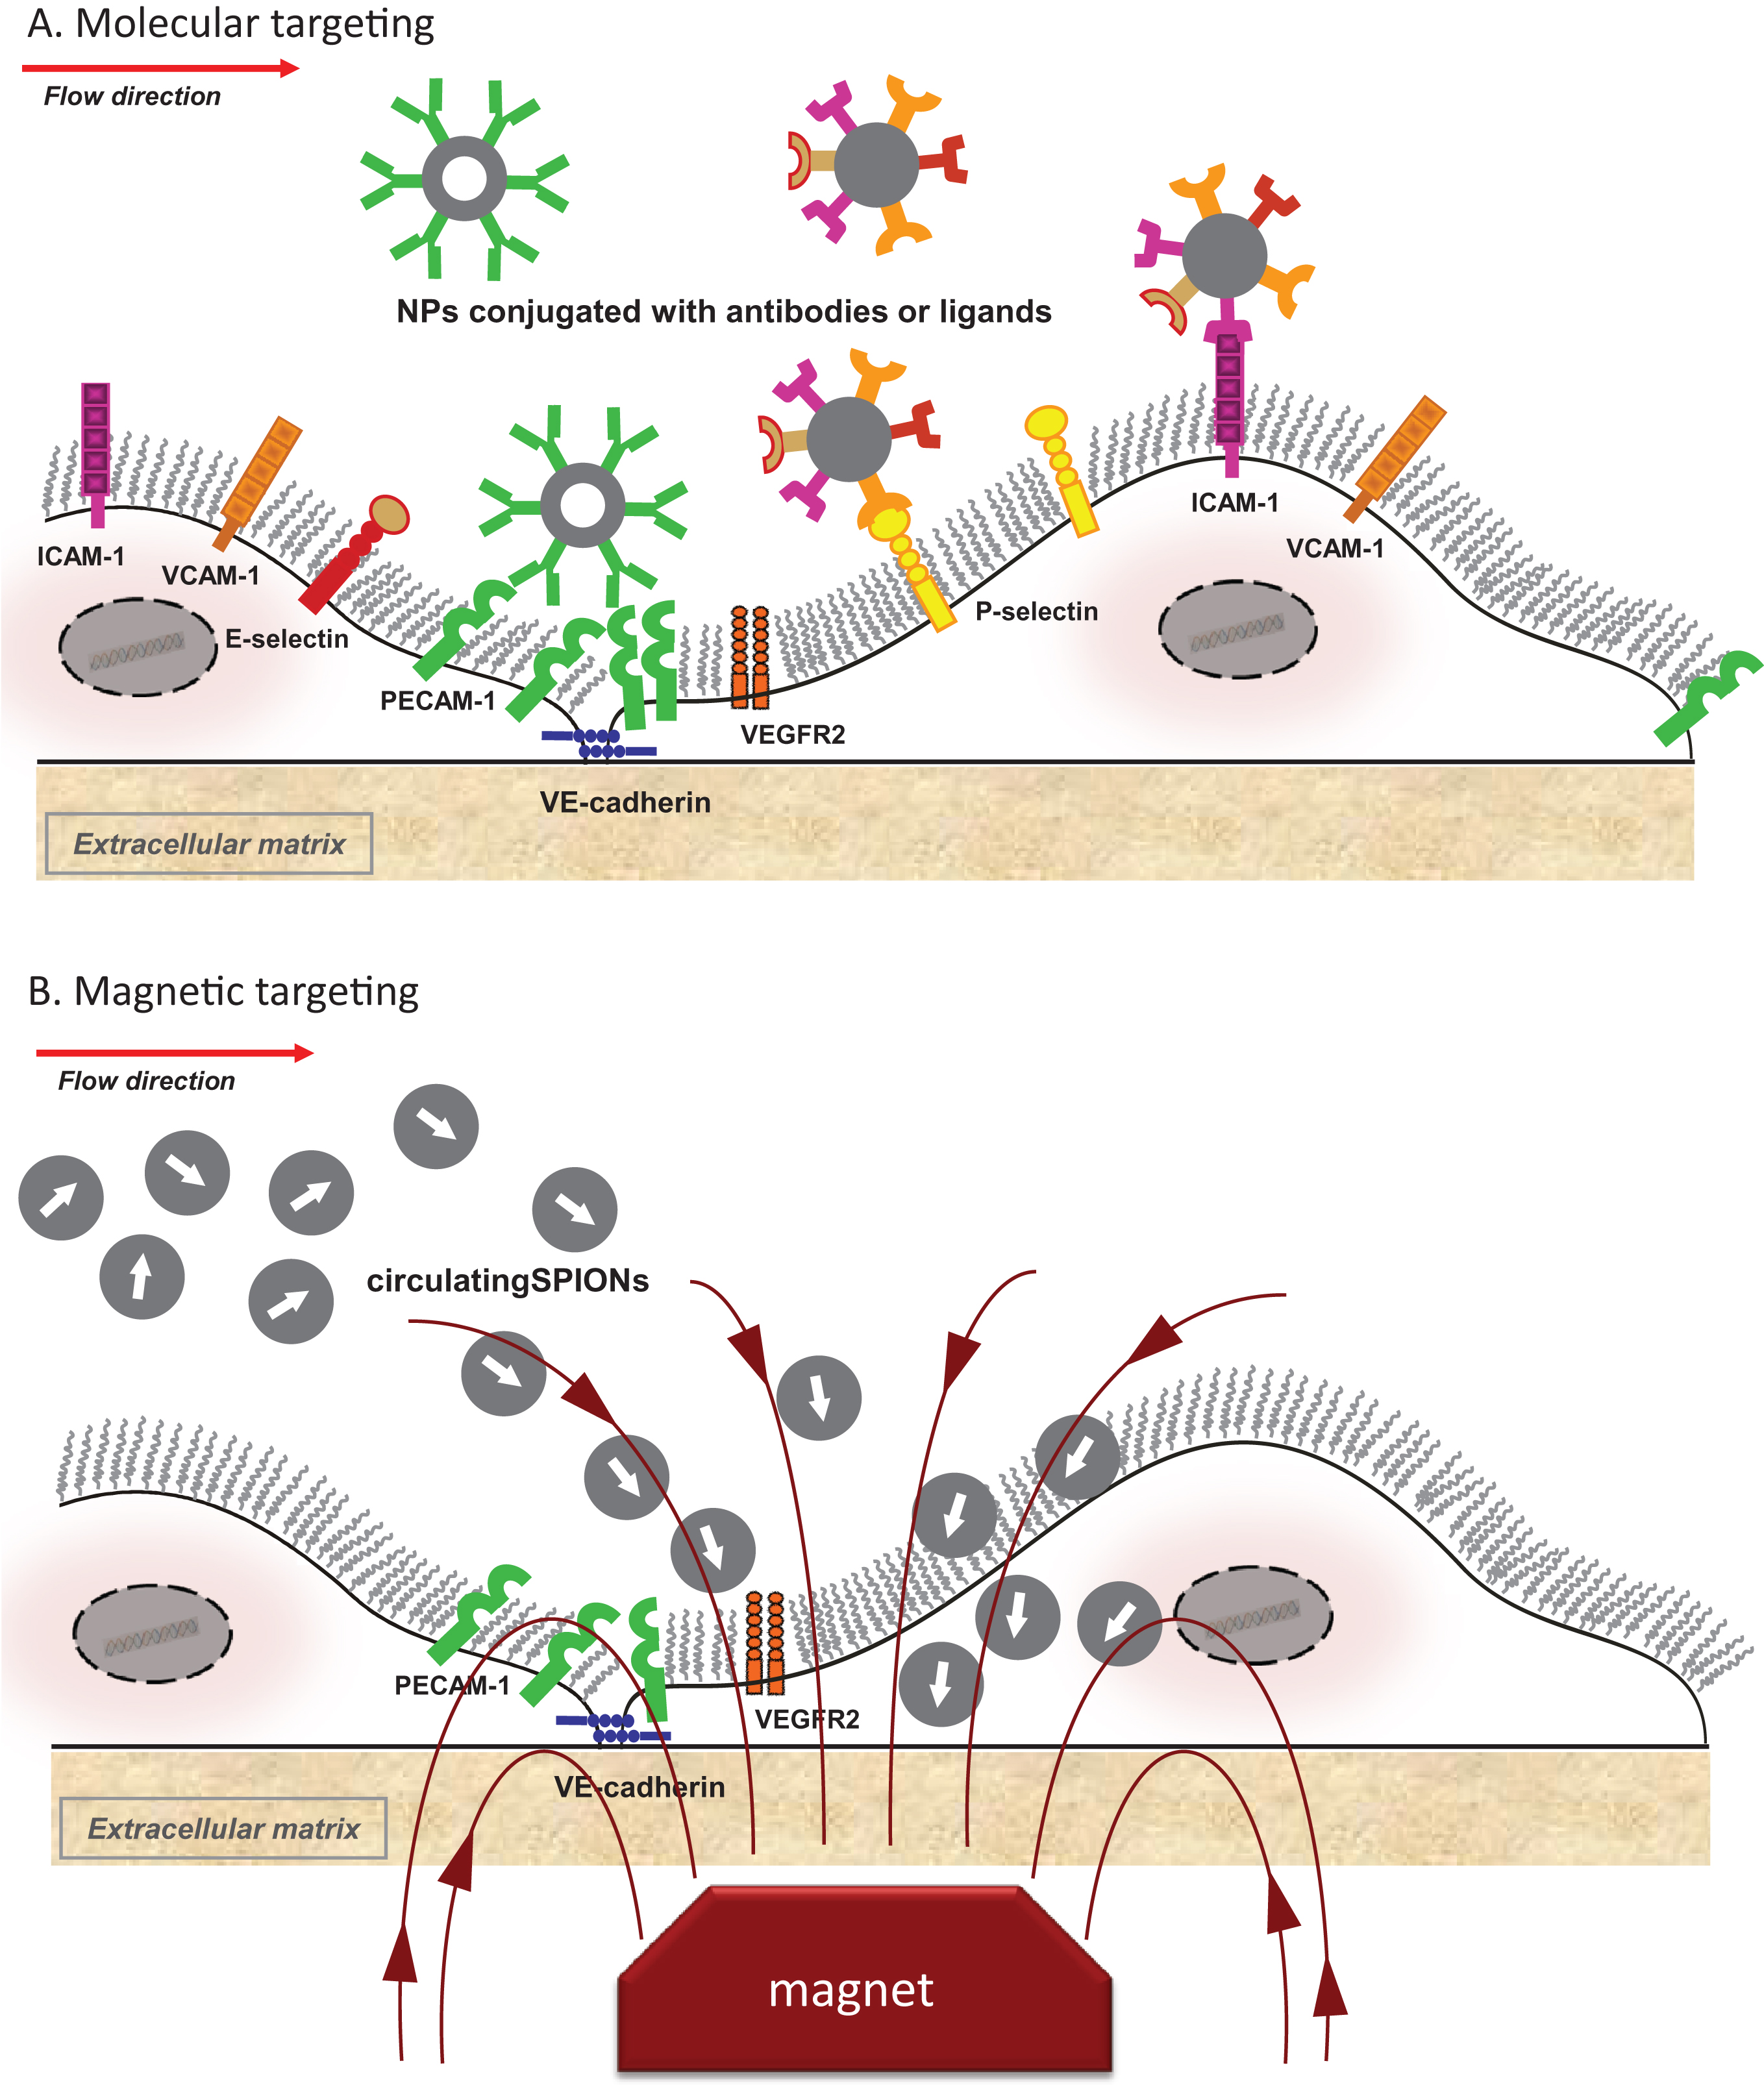 Active targeting of nanoparticles to endothelial cells. (A) Molecular targeting; (B) Magnetic targeting. ICAM-1, intercellular adhesion molecule-1; NP, nanoparticles; PECAM-1, platelet-endothelial cell adhesion molecule 1; SPIONs, superparamagnetic iron oxide nanoparticles; VCAM-1, vascular cell adhesion molecule-1; VE-cadherin, vascular endothelial cadherin, VEGFR2, vascular endothelial growth factor 2.